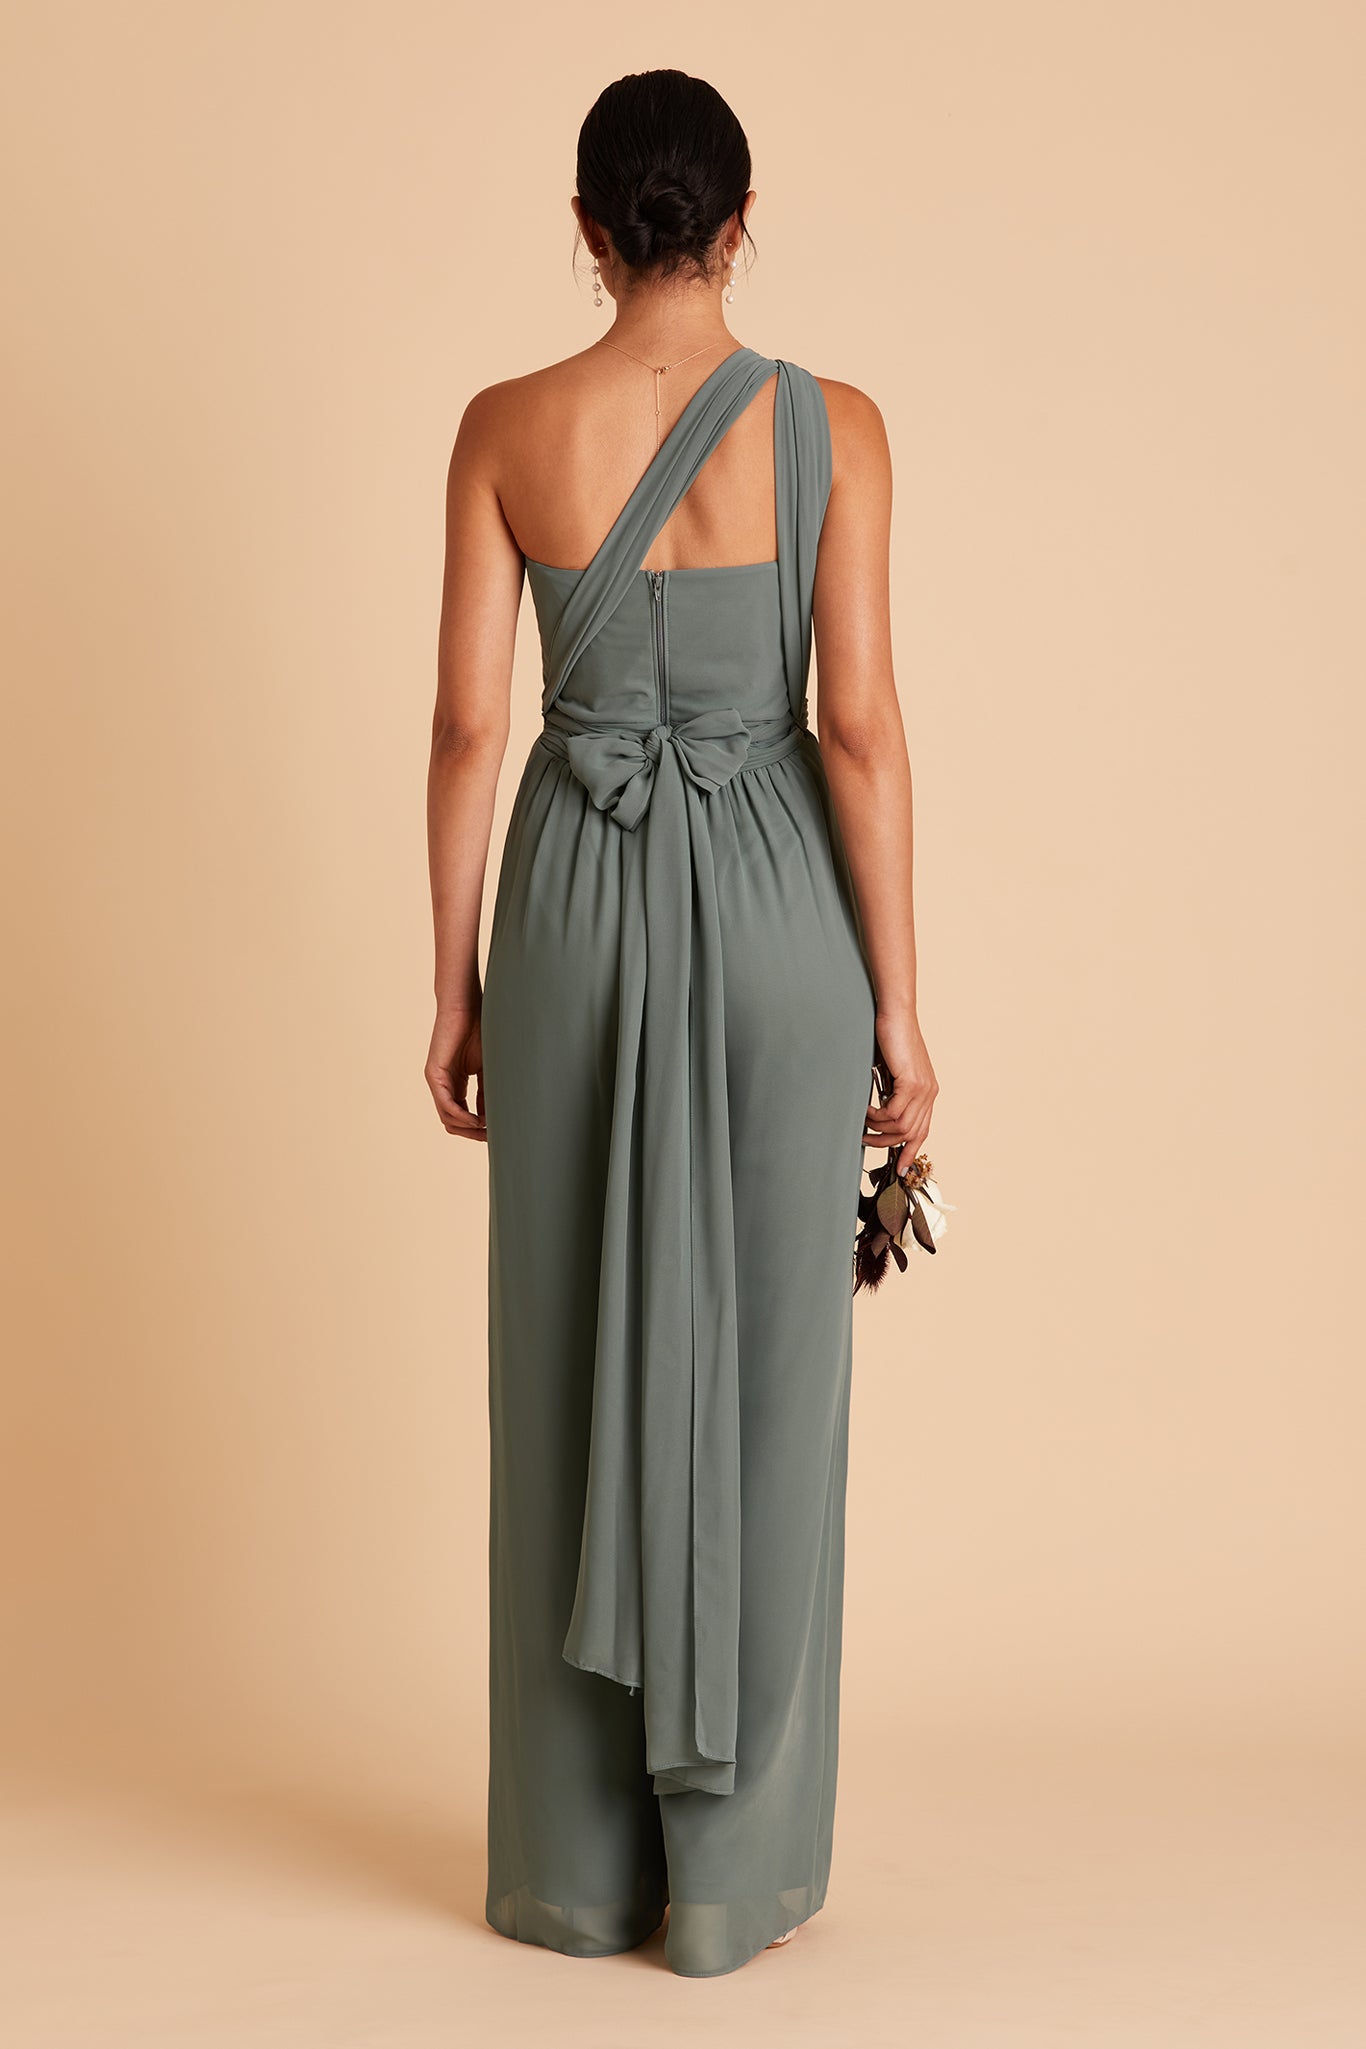 Gigi convertible jumpsuit in sea glass chiffon by Birdy Grey, back view